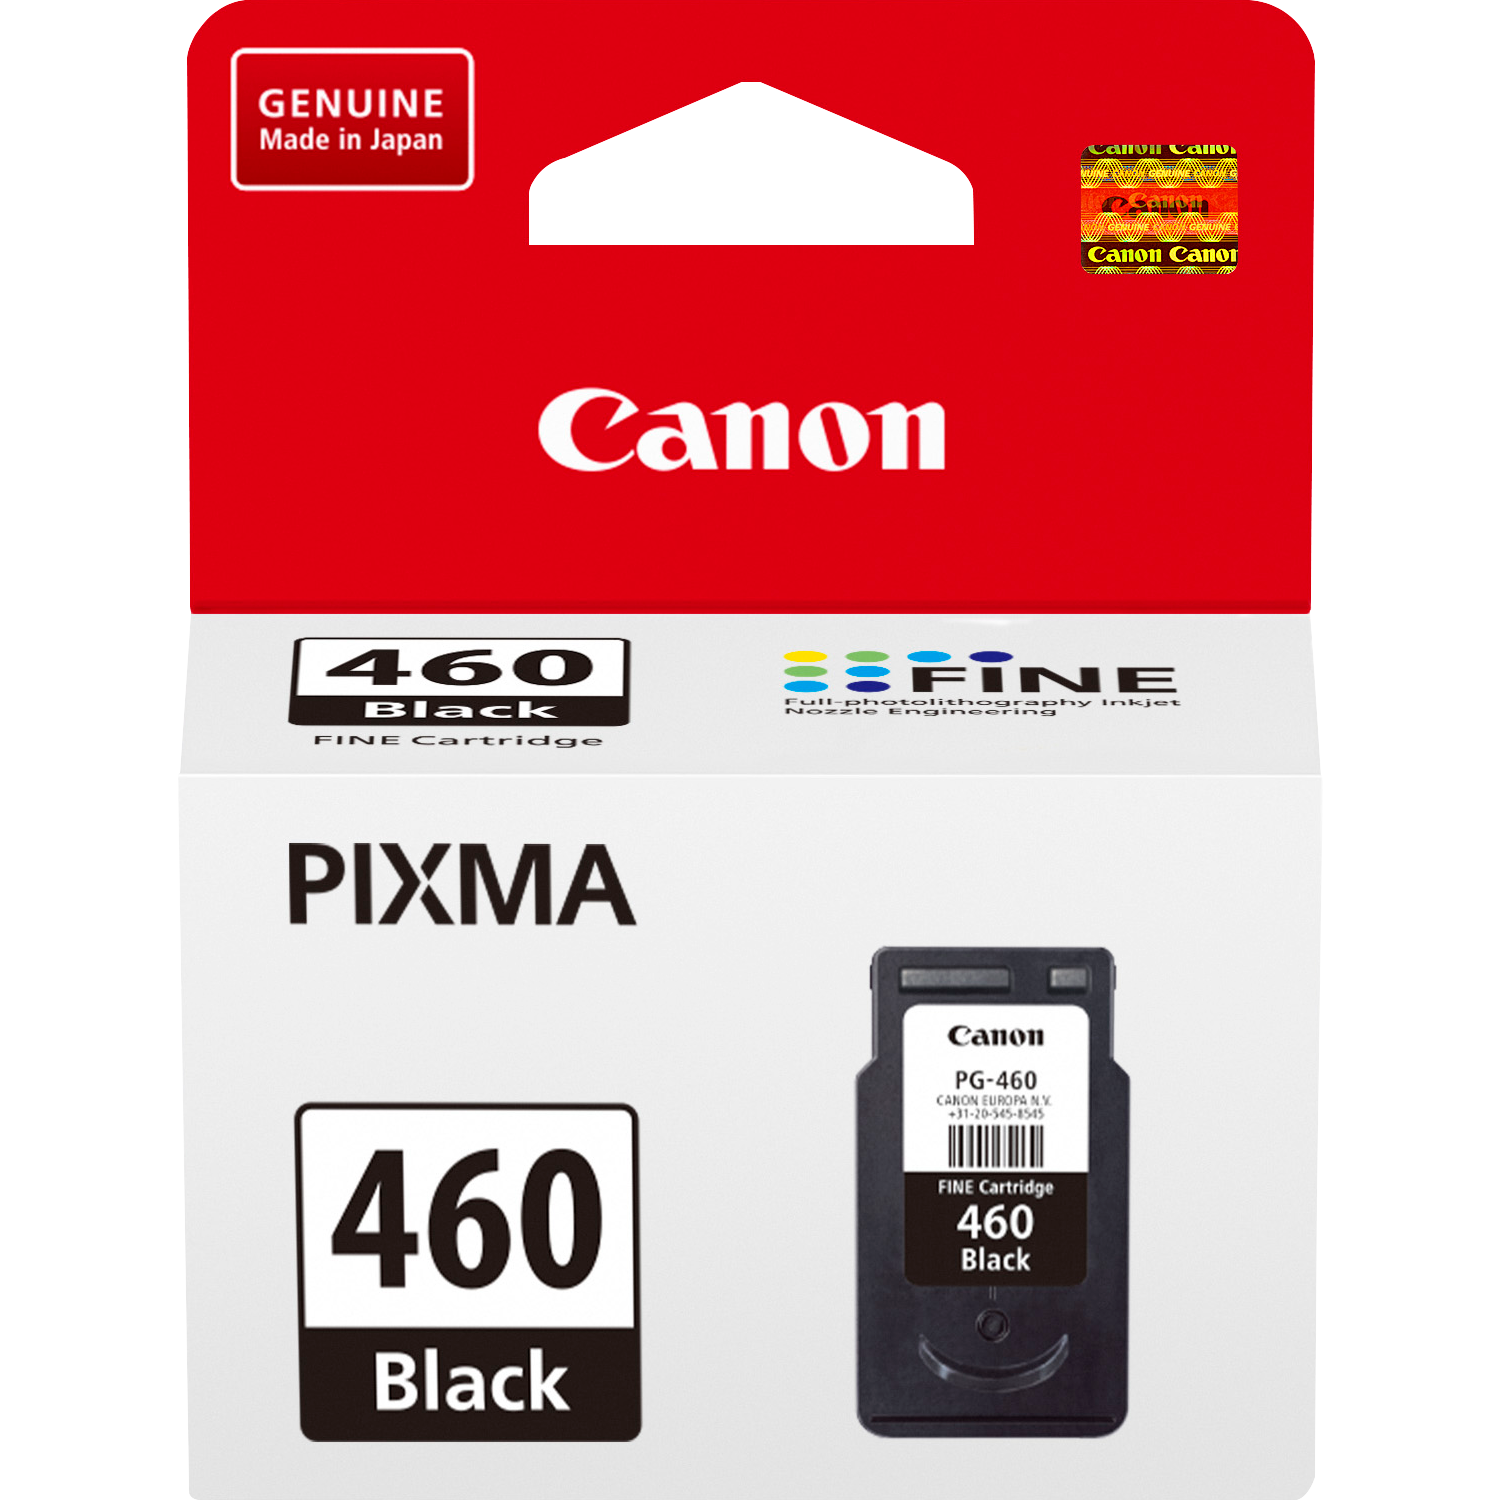 Compatible for Canon Pixus TS203 TS303 TS3130 TR4530 Printer Black x 2 FOBCO 345 346 XL Remanufactured Ink Cartridges for Canon PG-345XL CL-346XL Replacement 